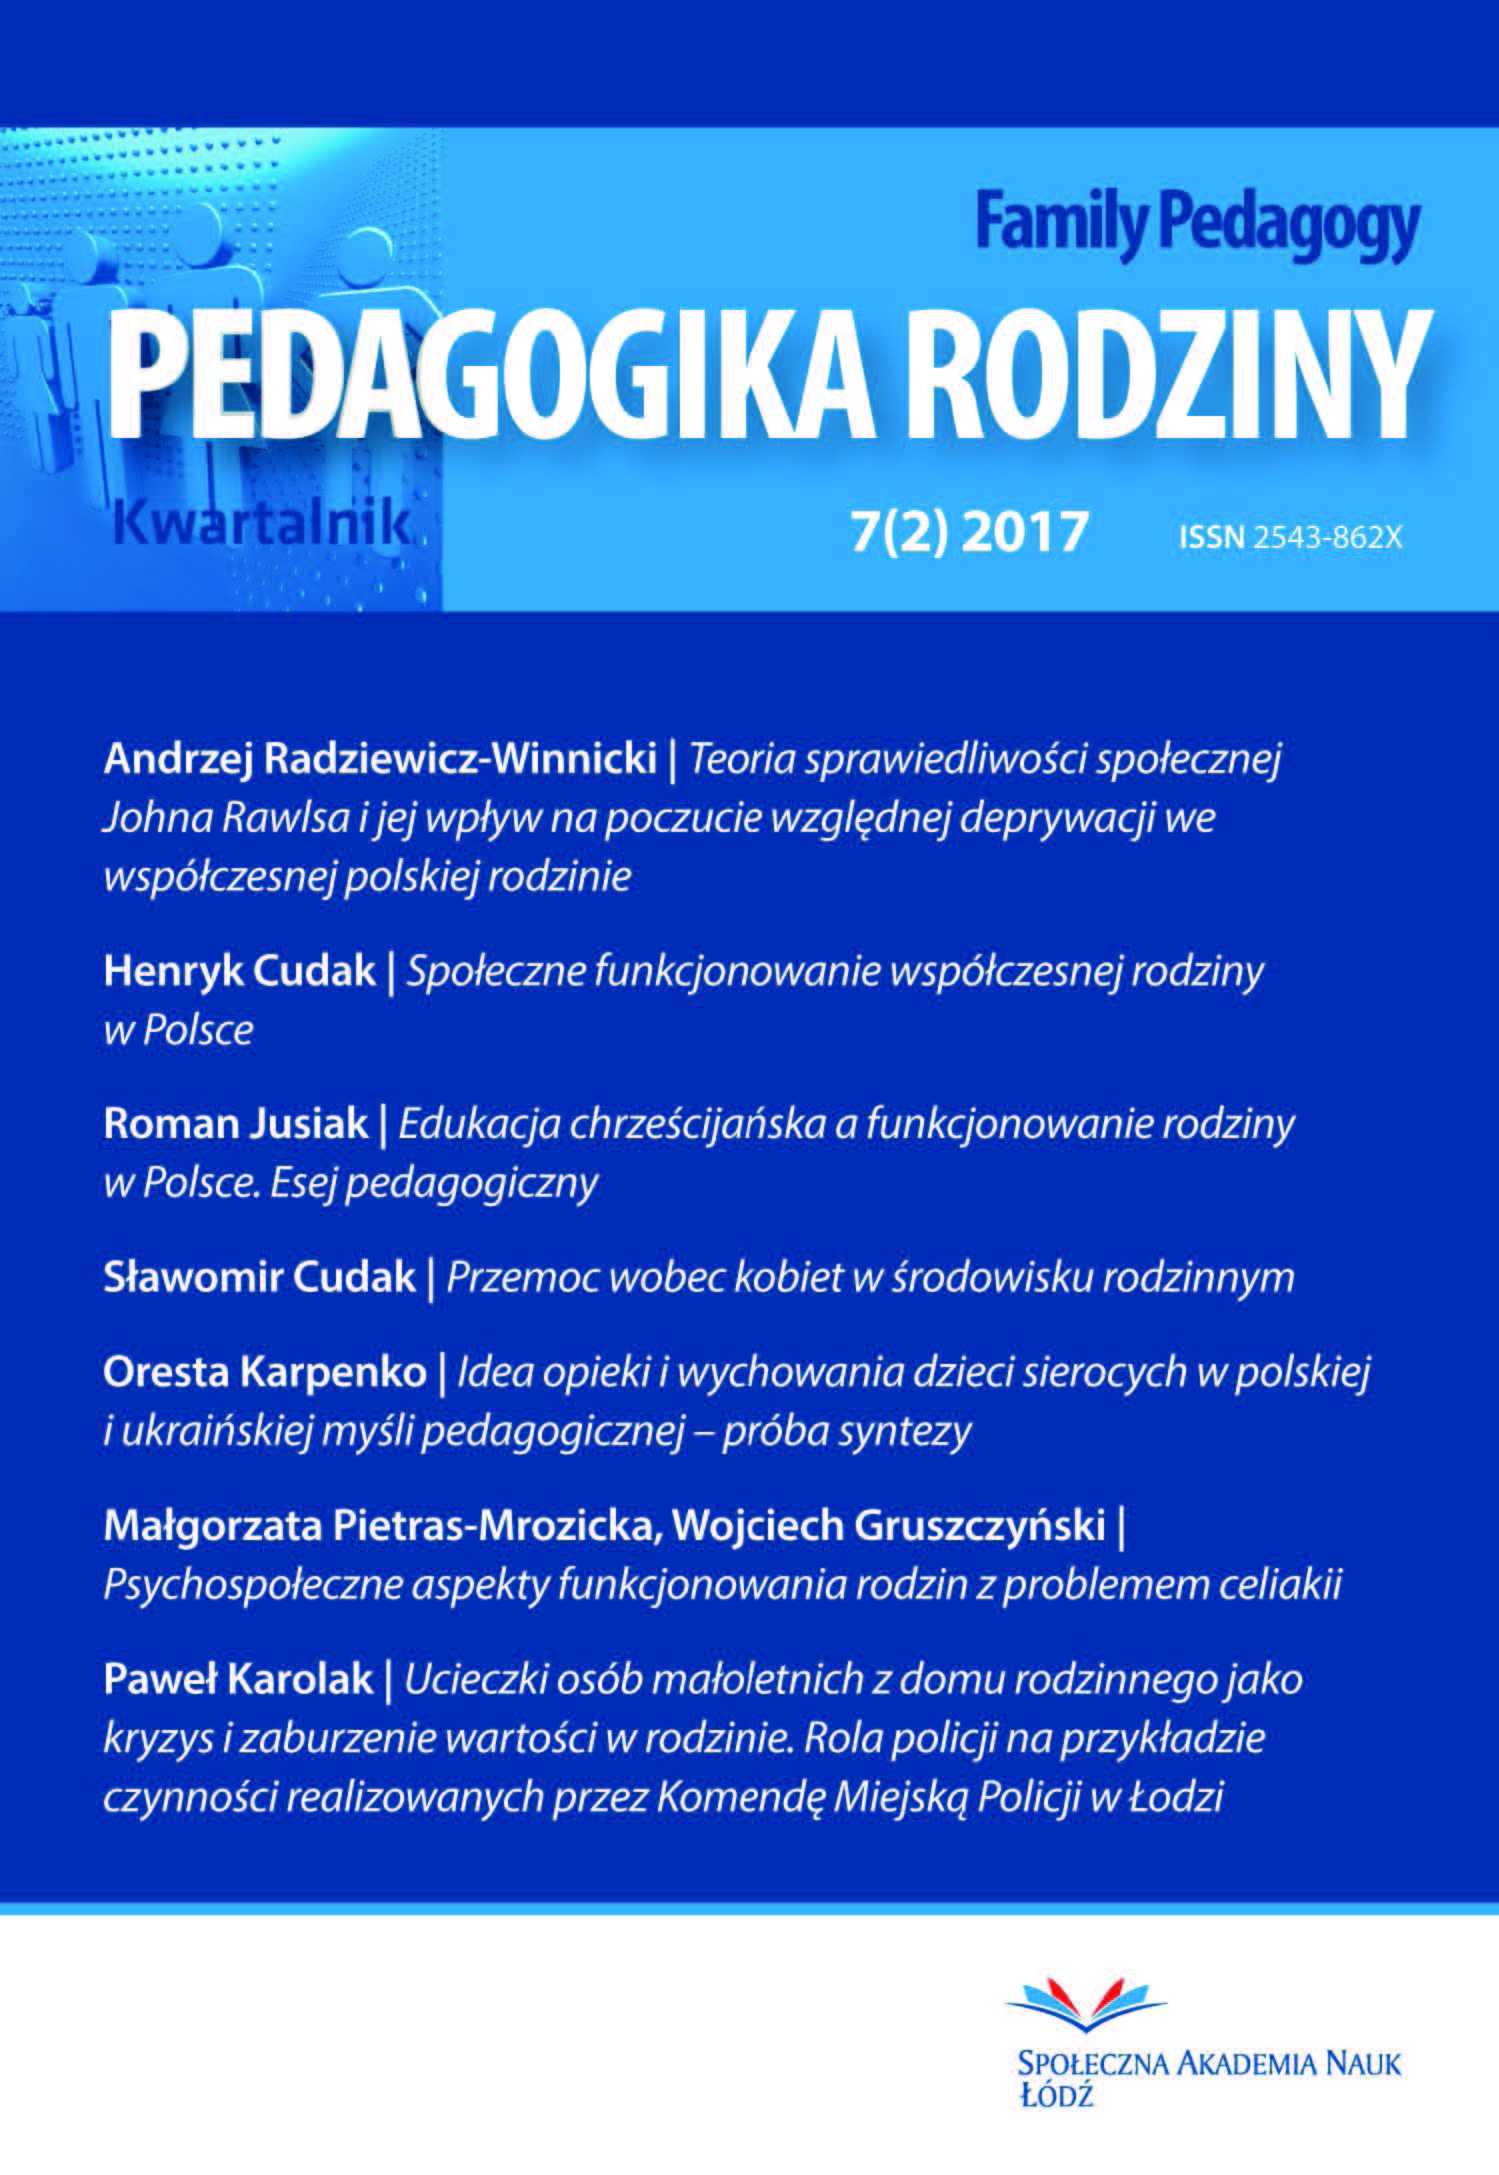 Juveniles’ Escapes as a Crisis and Value Disorder in the Family. The Role of the Police as an Example of Activities Carried out by the Municipal Police Headquarters in Lodz Cover Image